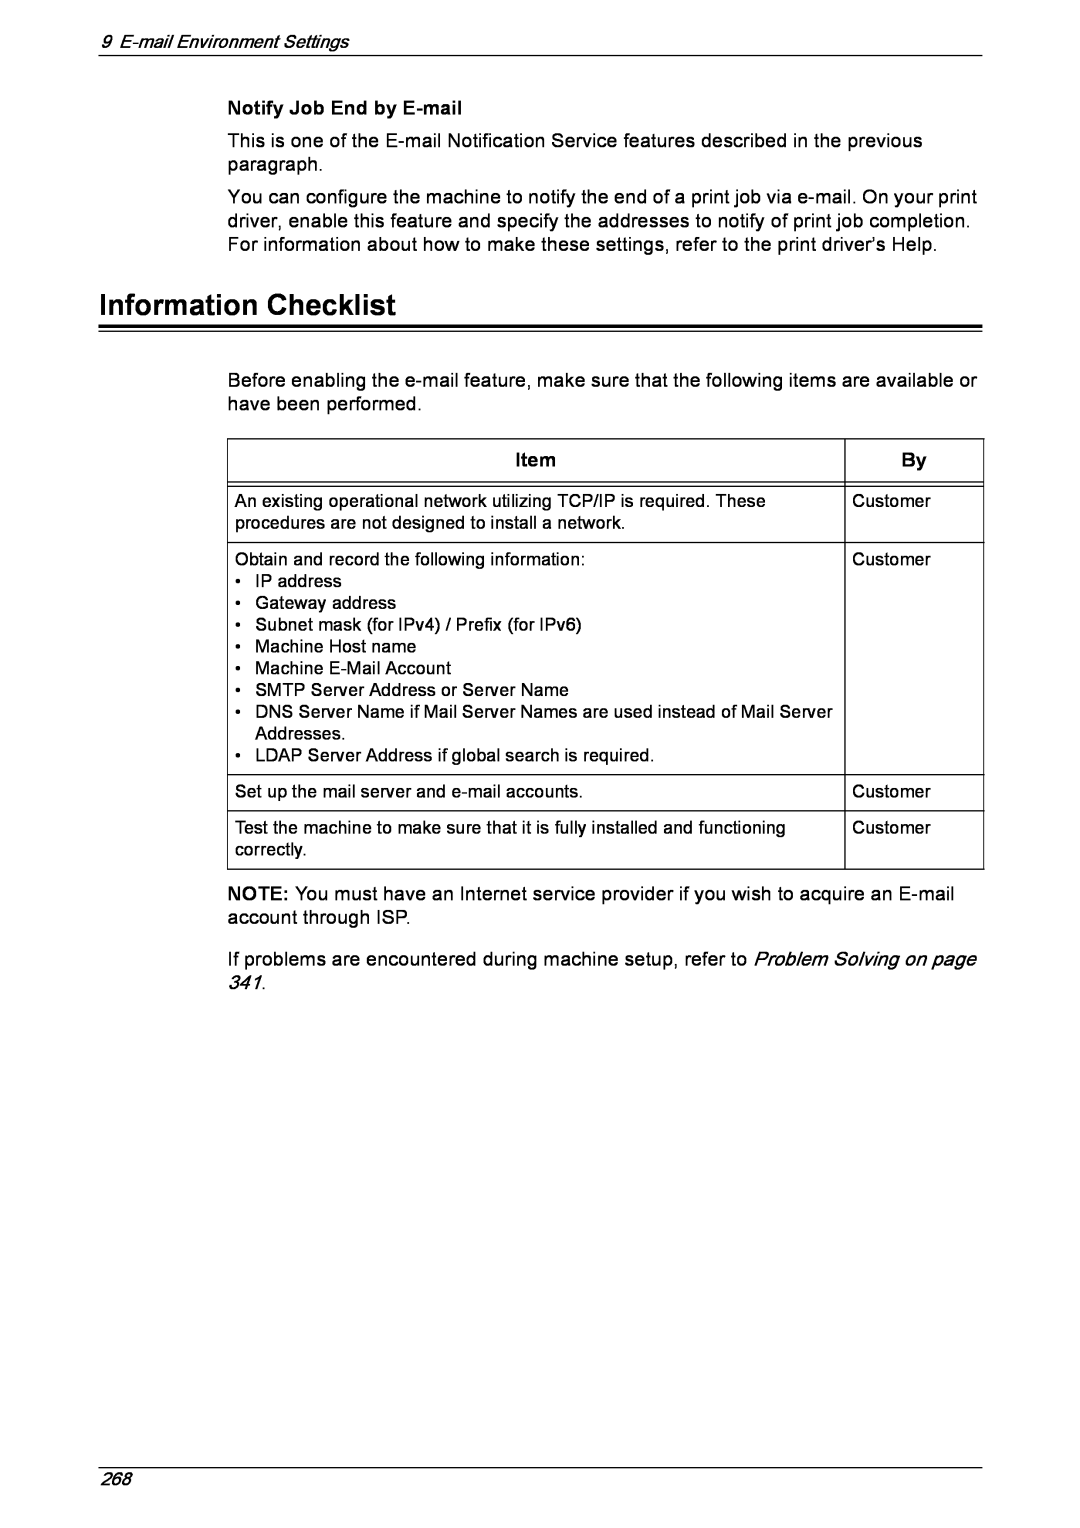 Xerox 5222 manual Information Checklist, Notify Job End by E-mail, Item 